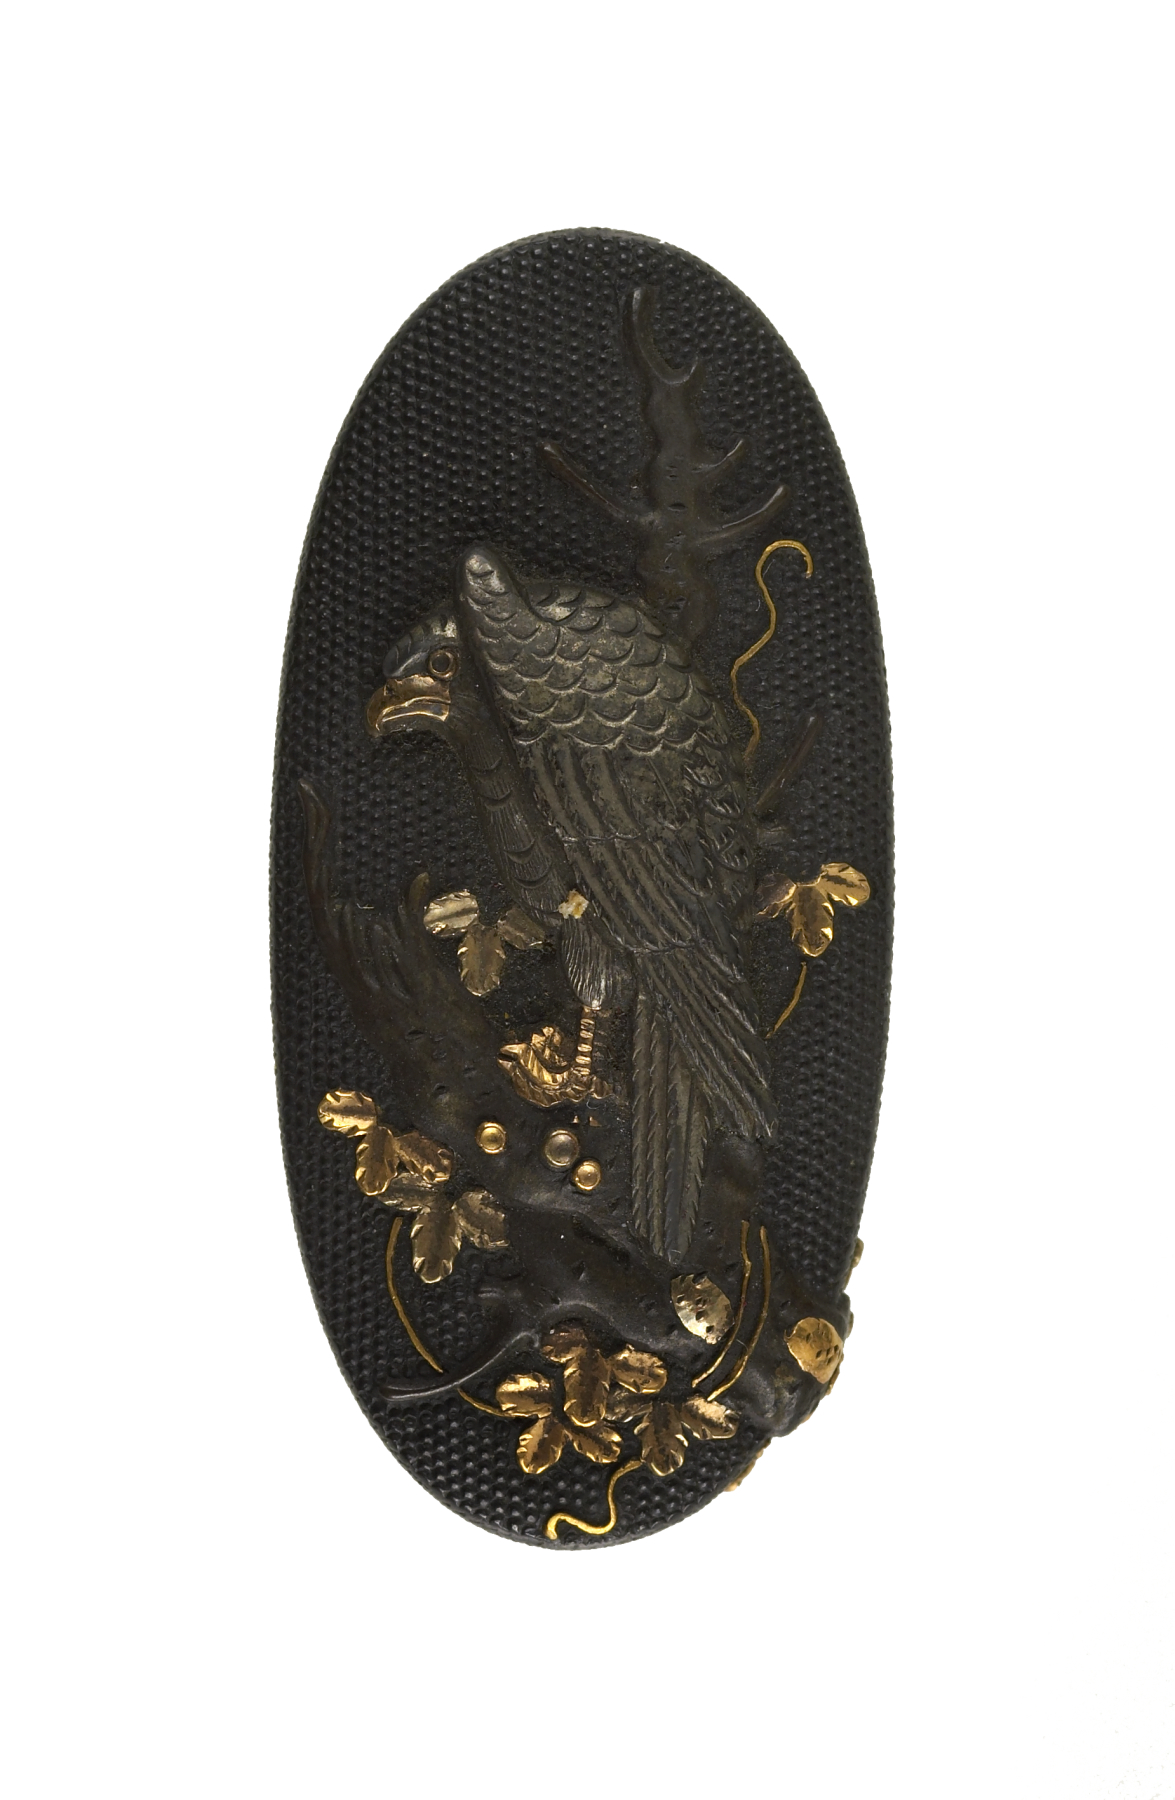 Image for Kashira with Hawk